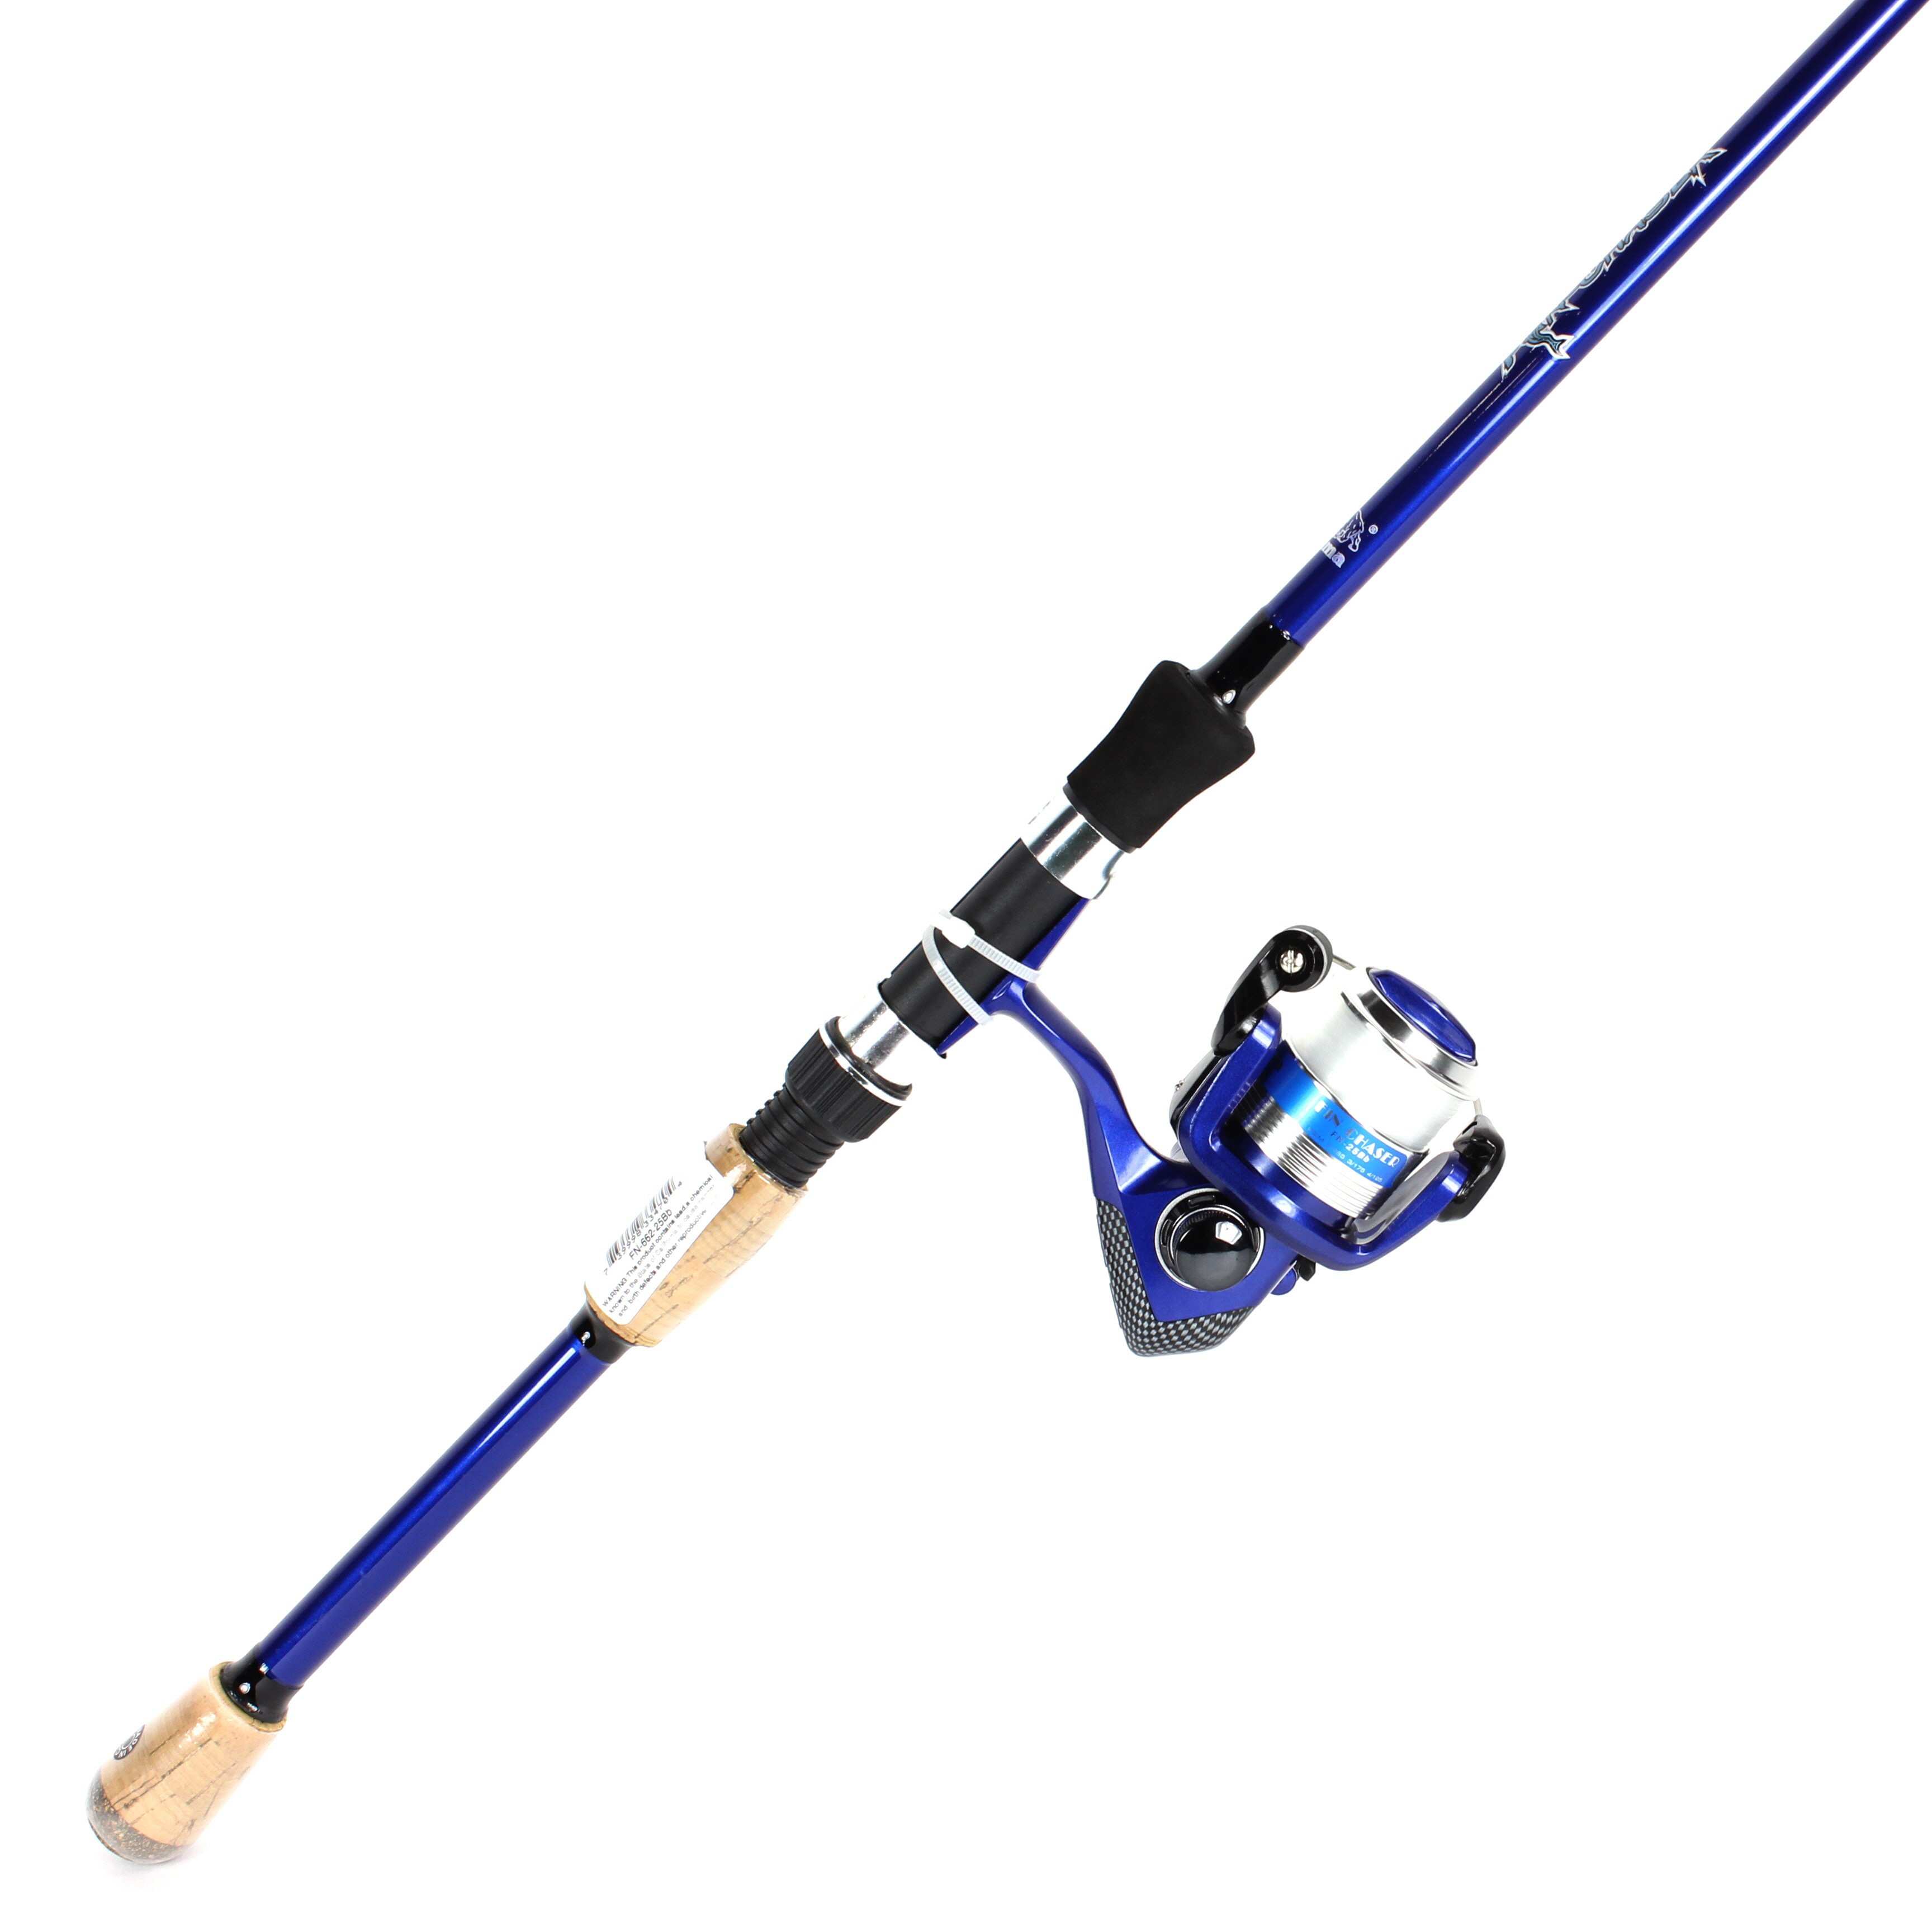 Fin Chaser X Series Combos (NEW)  OKUMA Fishing Rods and Reels